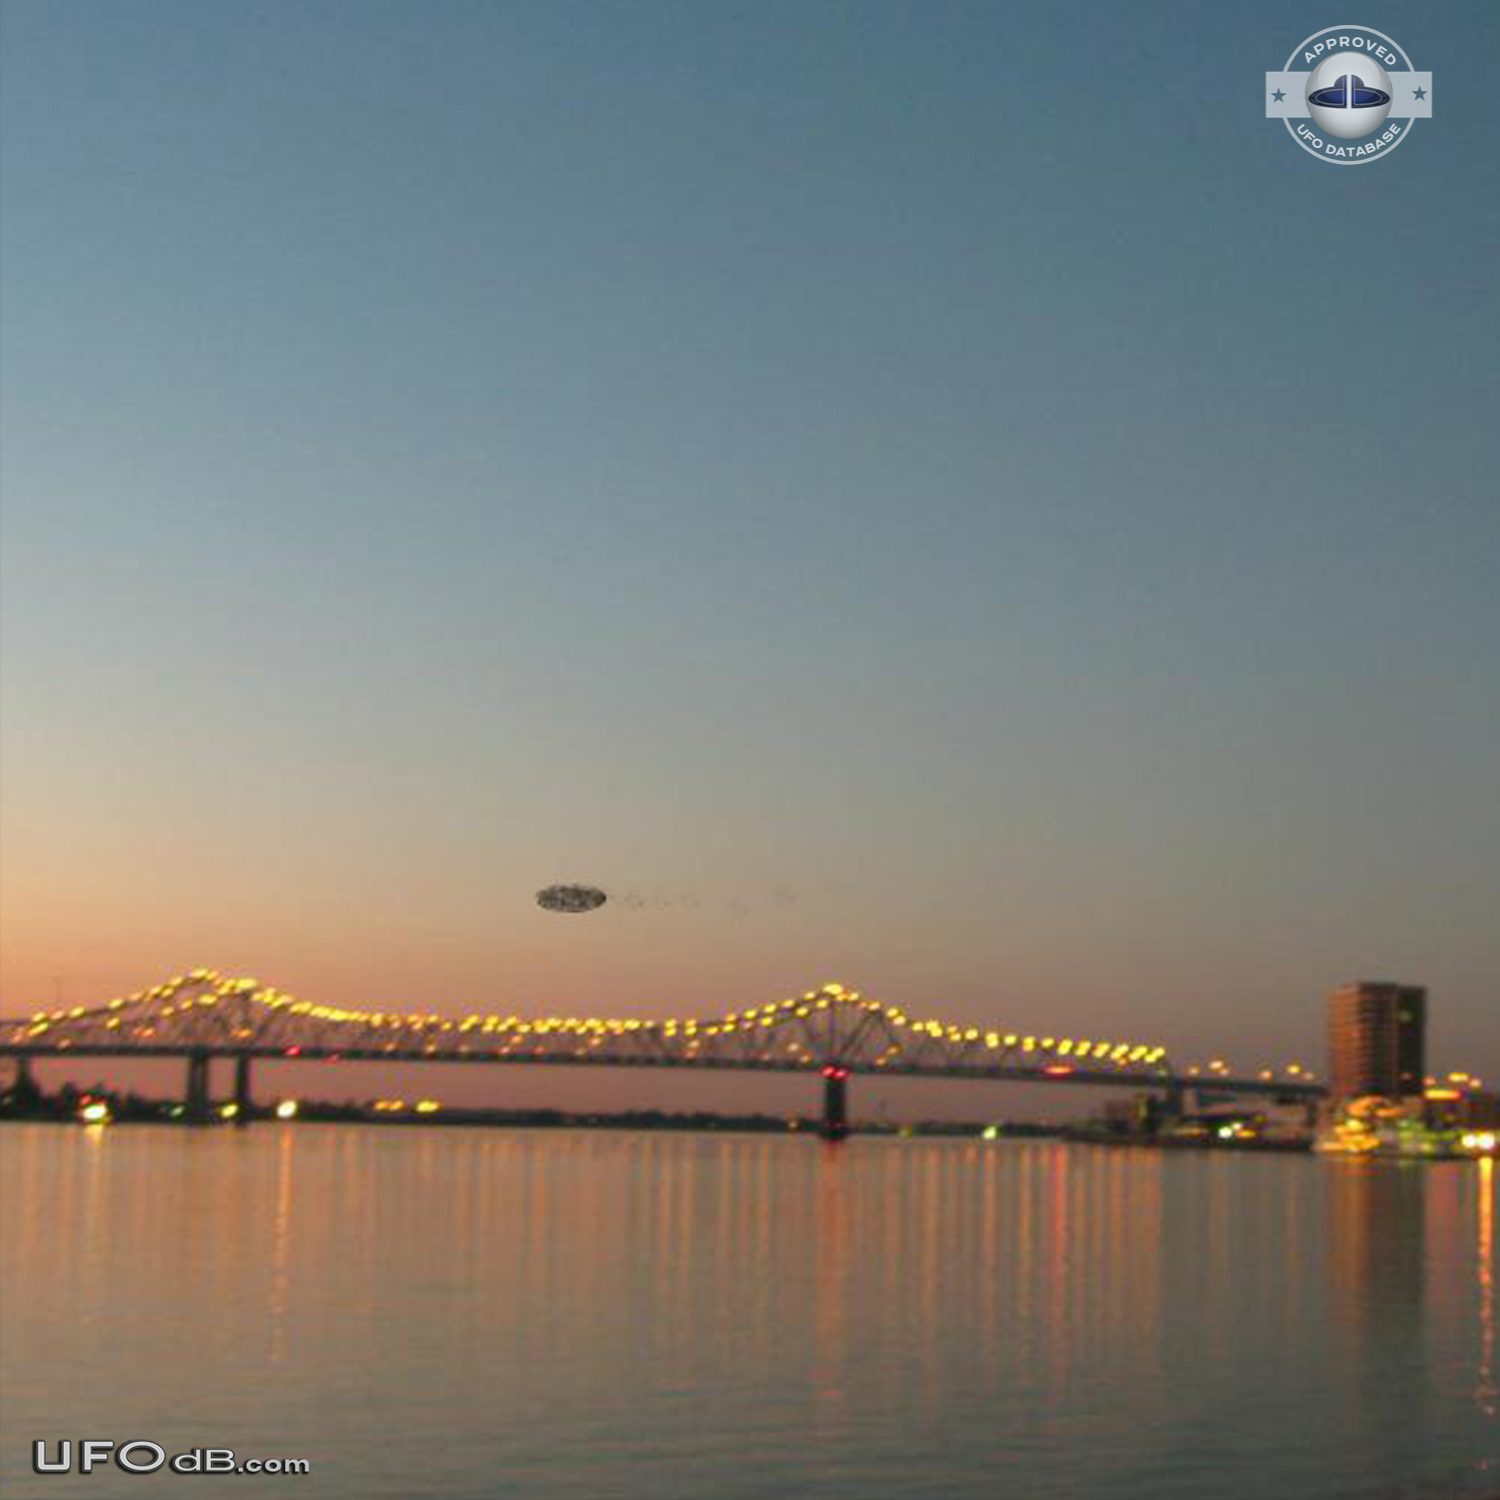 Dark shadowy disc UFO over the Mississippi New Orleans Louisiana 2012 UFO Picture #513-1